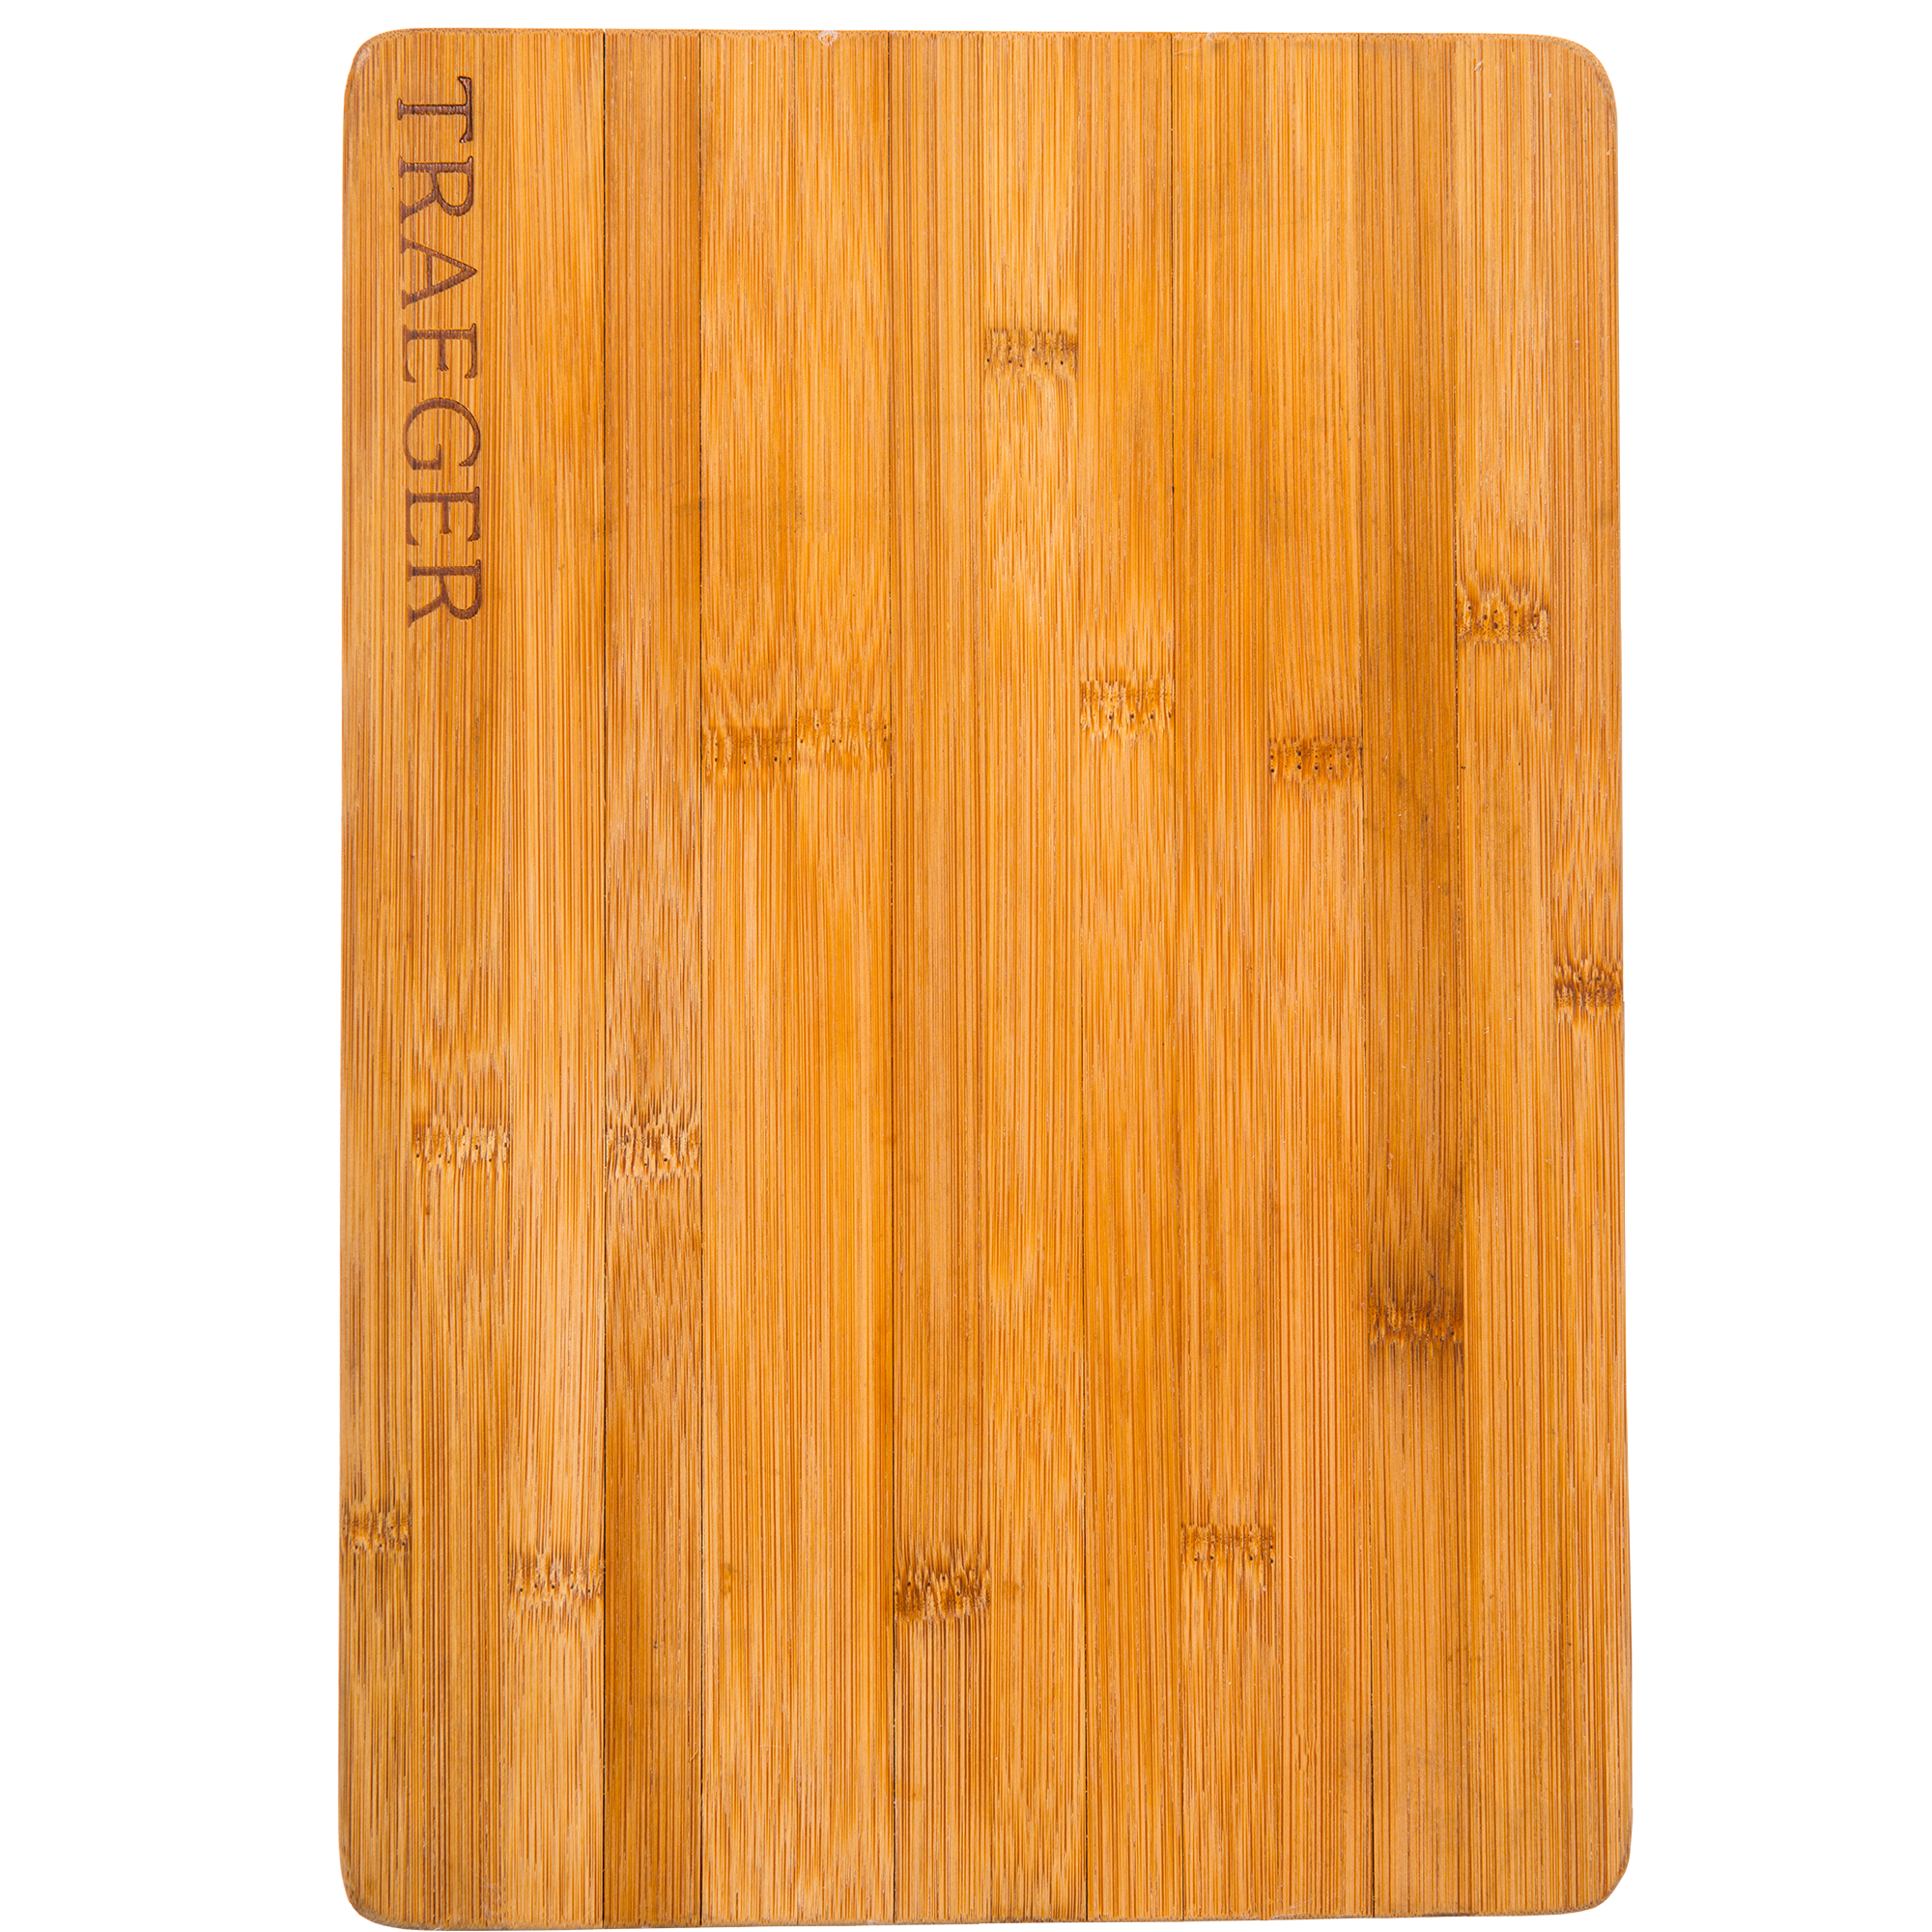 Magnetic Bamboo Cutting Board | Traeger Wood Fired Grills